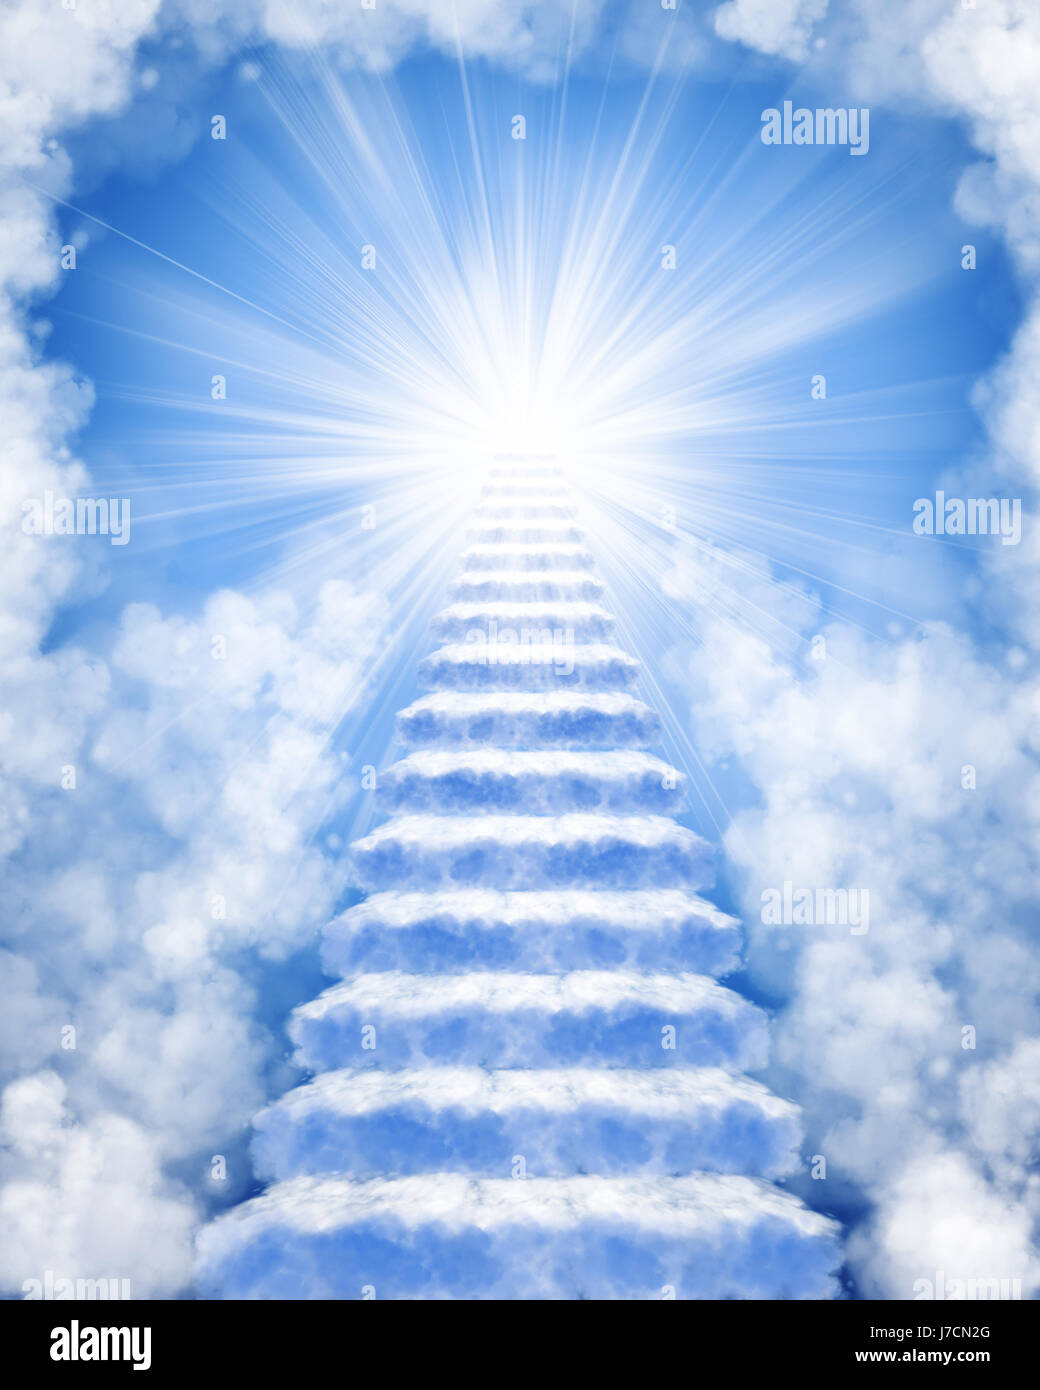 Heaven Steps Background, Stock Video